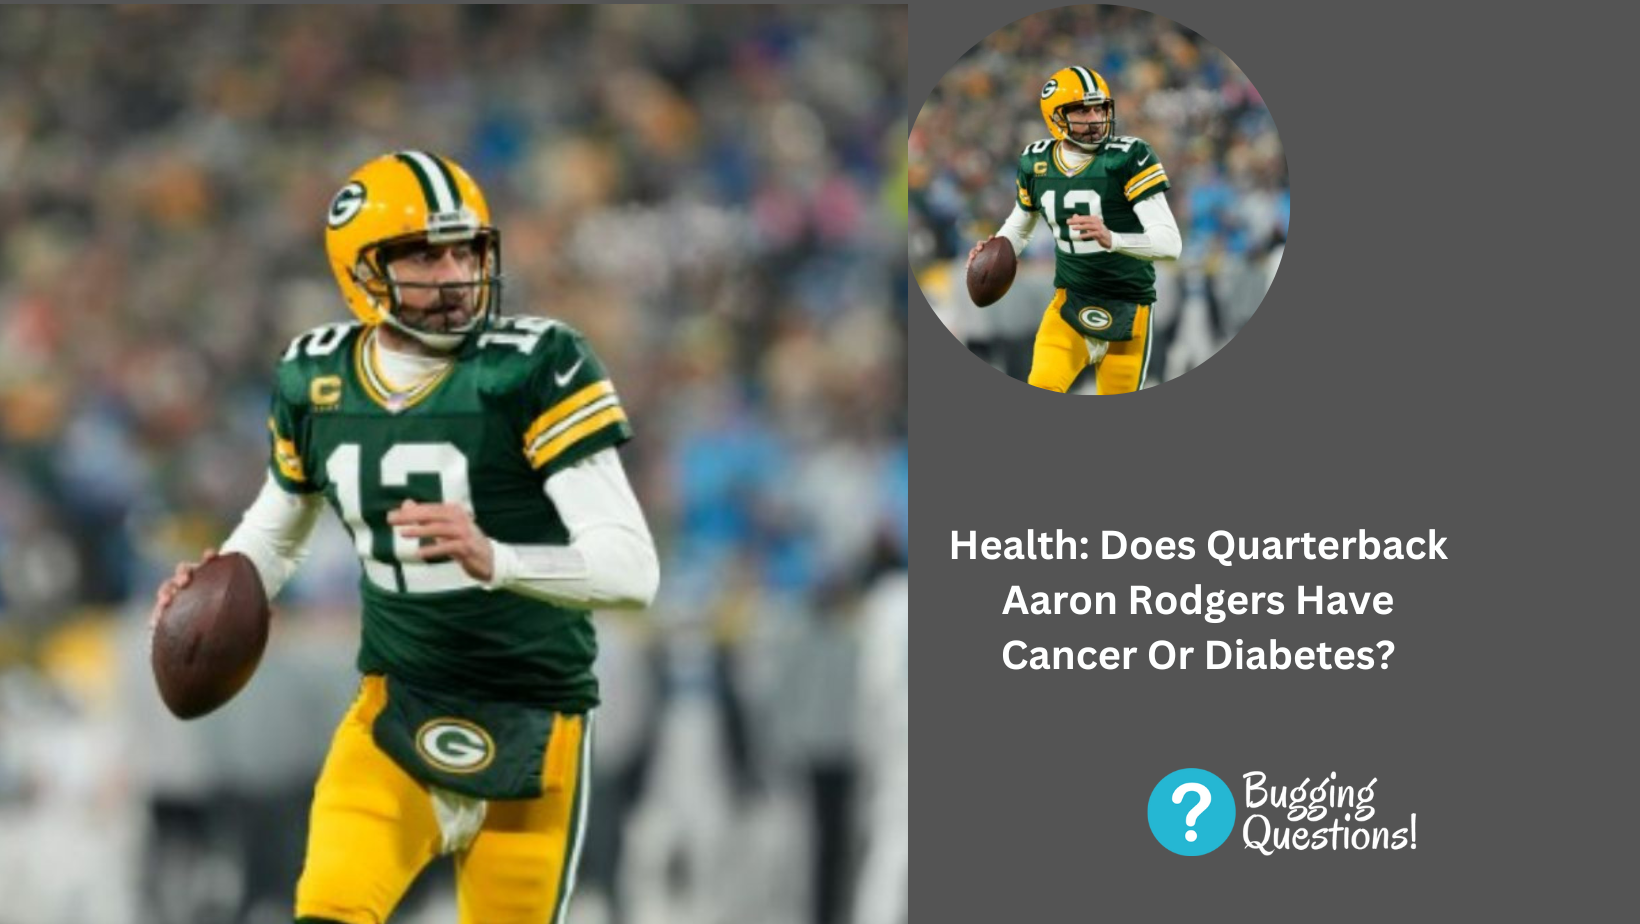 Health: Does Quarterback Aaron Rodgers Have Cancer Or Diabetes?